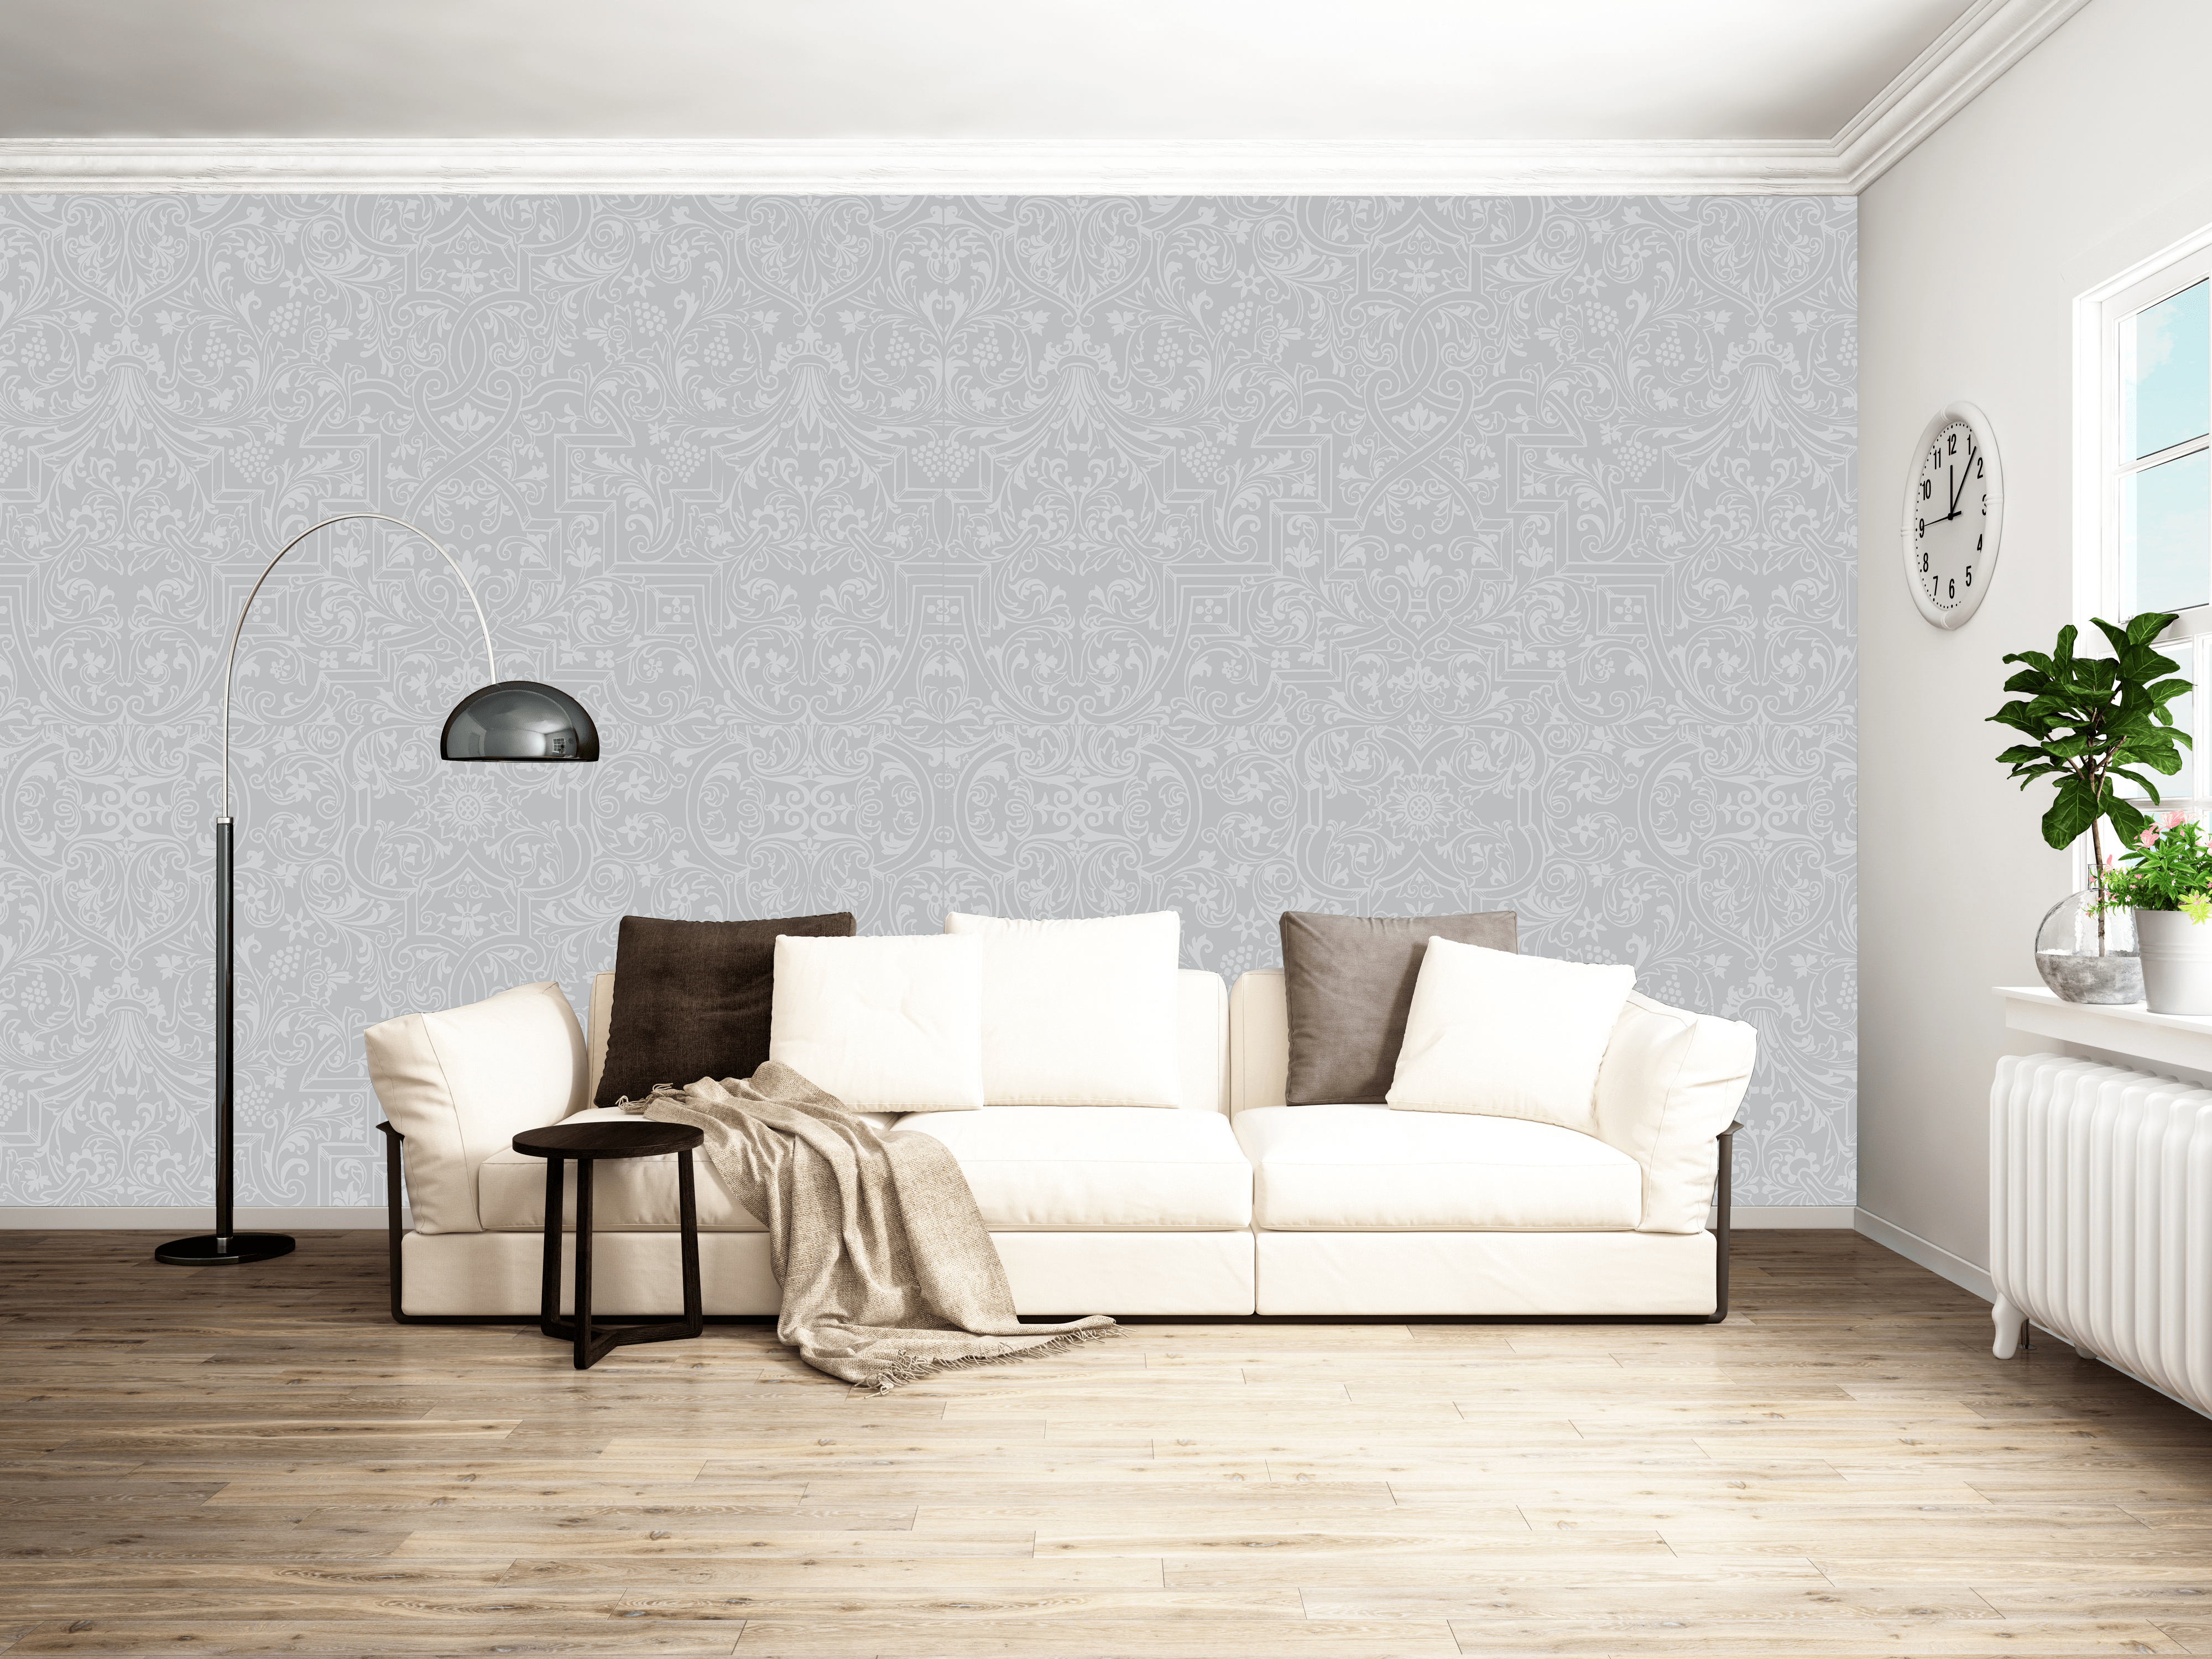 Modern and Elegant Wallpapers for Your Living Room → wallcolors.com